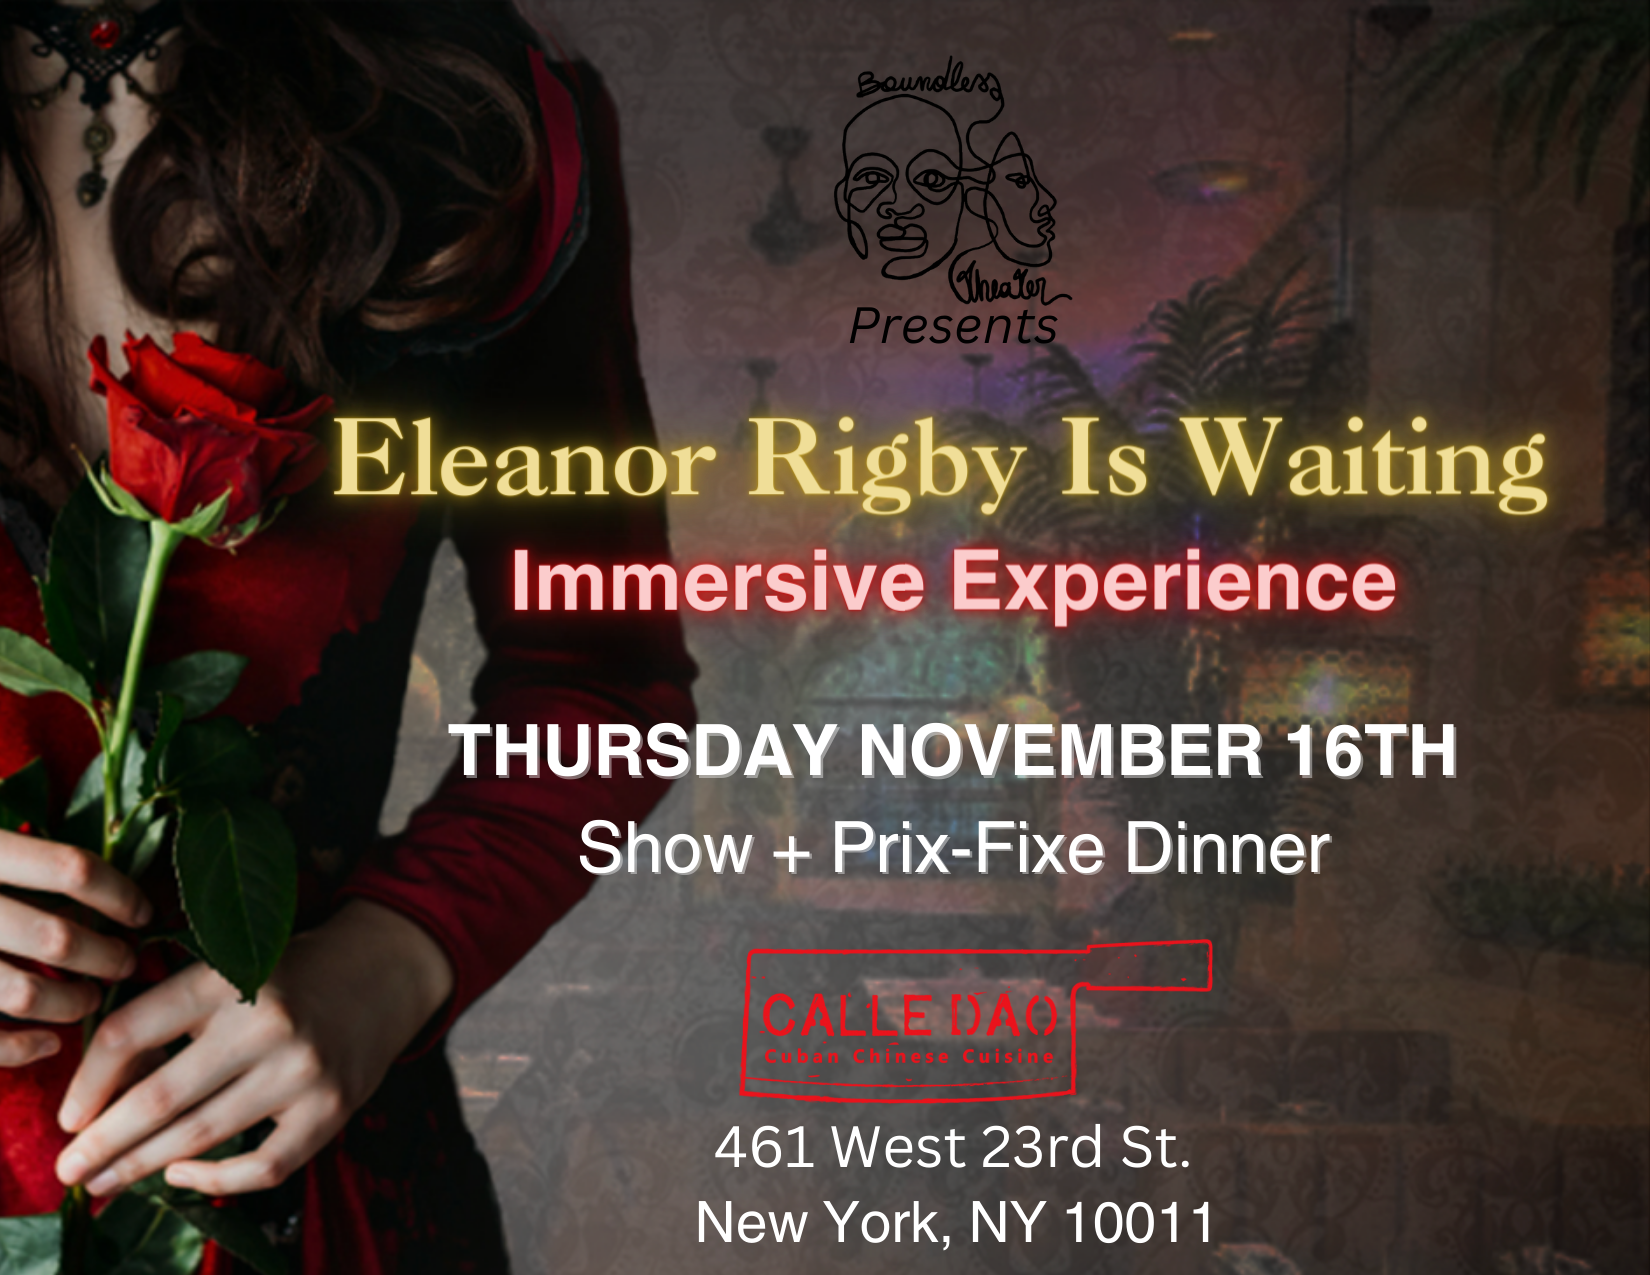 Eleanor Rigby Is Waiting Immersive Experience